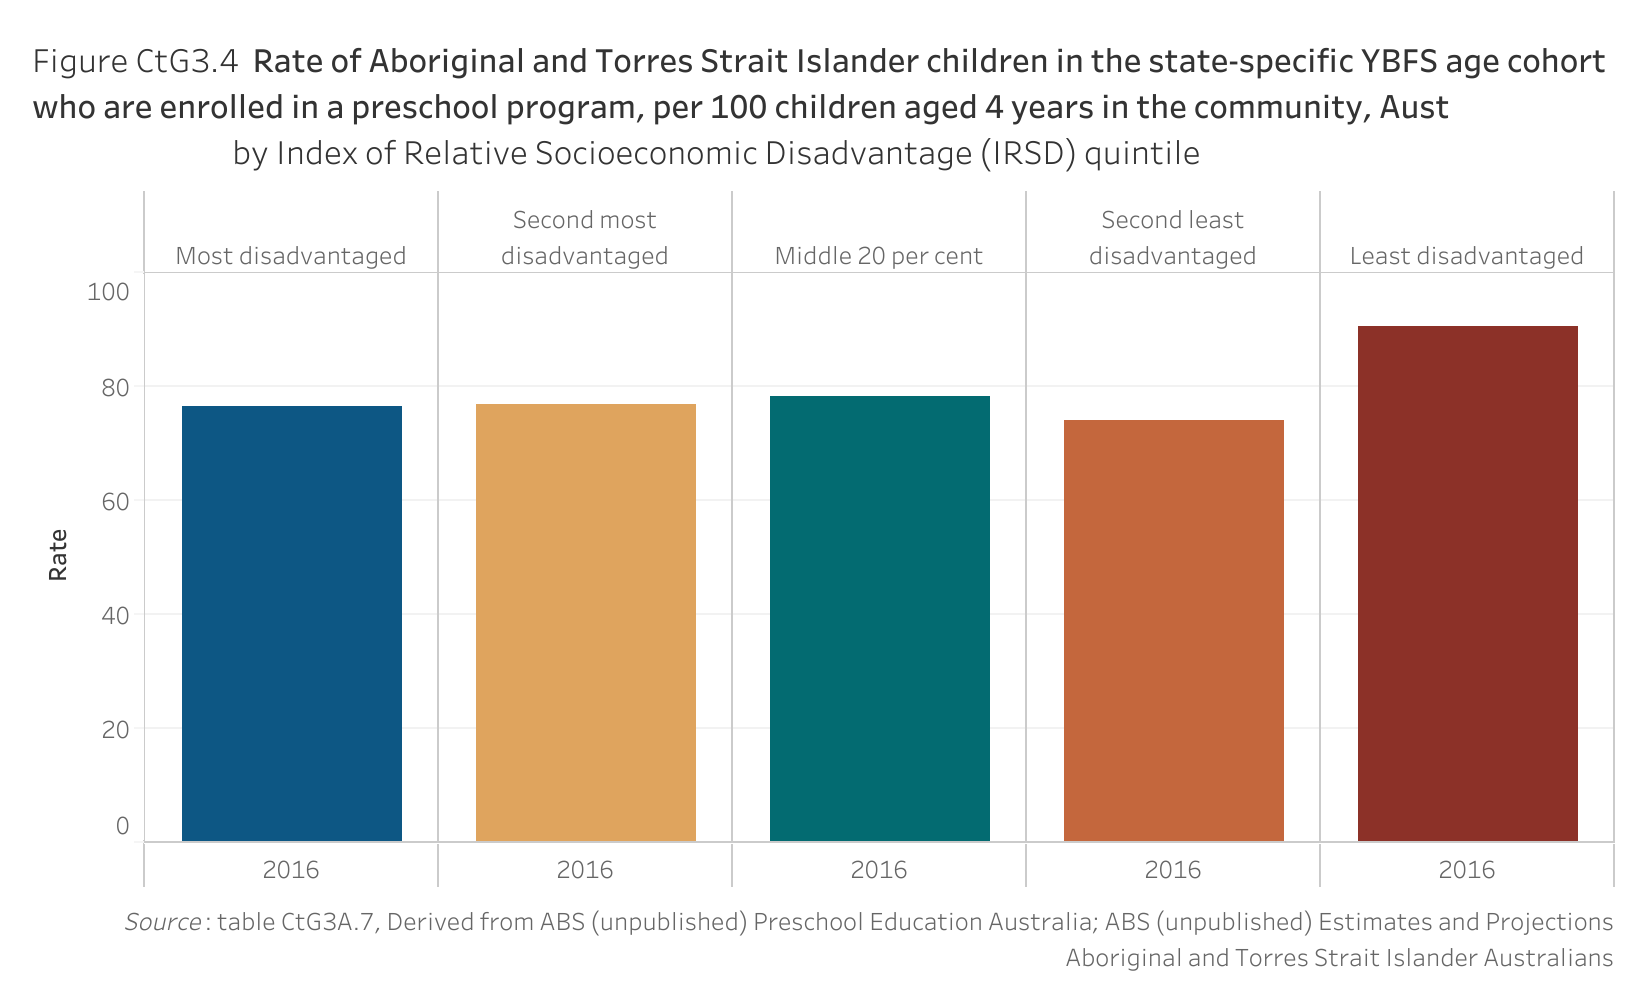 Figure CtG3.4 shows the rate of Aboriginal and Torres Strait Islander children in the state-specific Year Before Full time Schooling age cohort who are enrolled in a preschool program, per 100 children aged 4 years in the community, Australia, by Index of Relative Socioeconomic Disadvantage quintile. More details can be found within the text near this image.